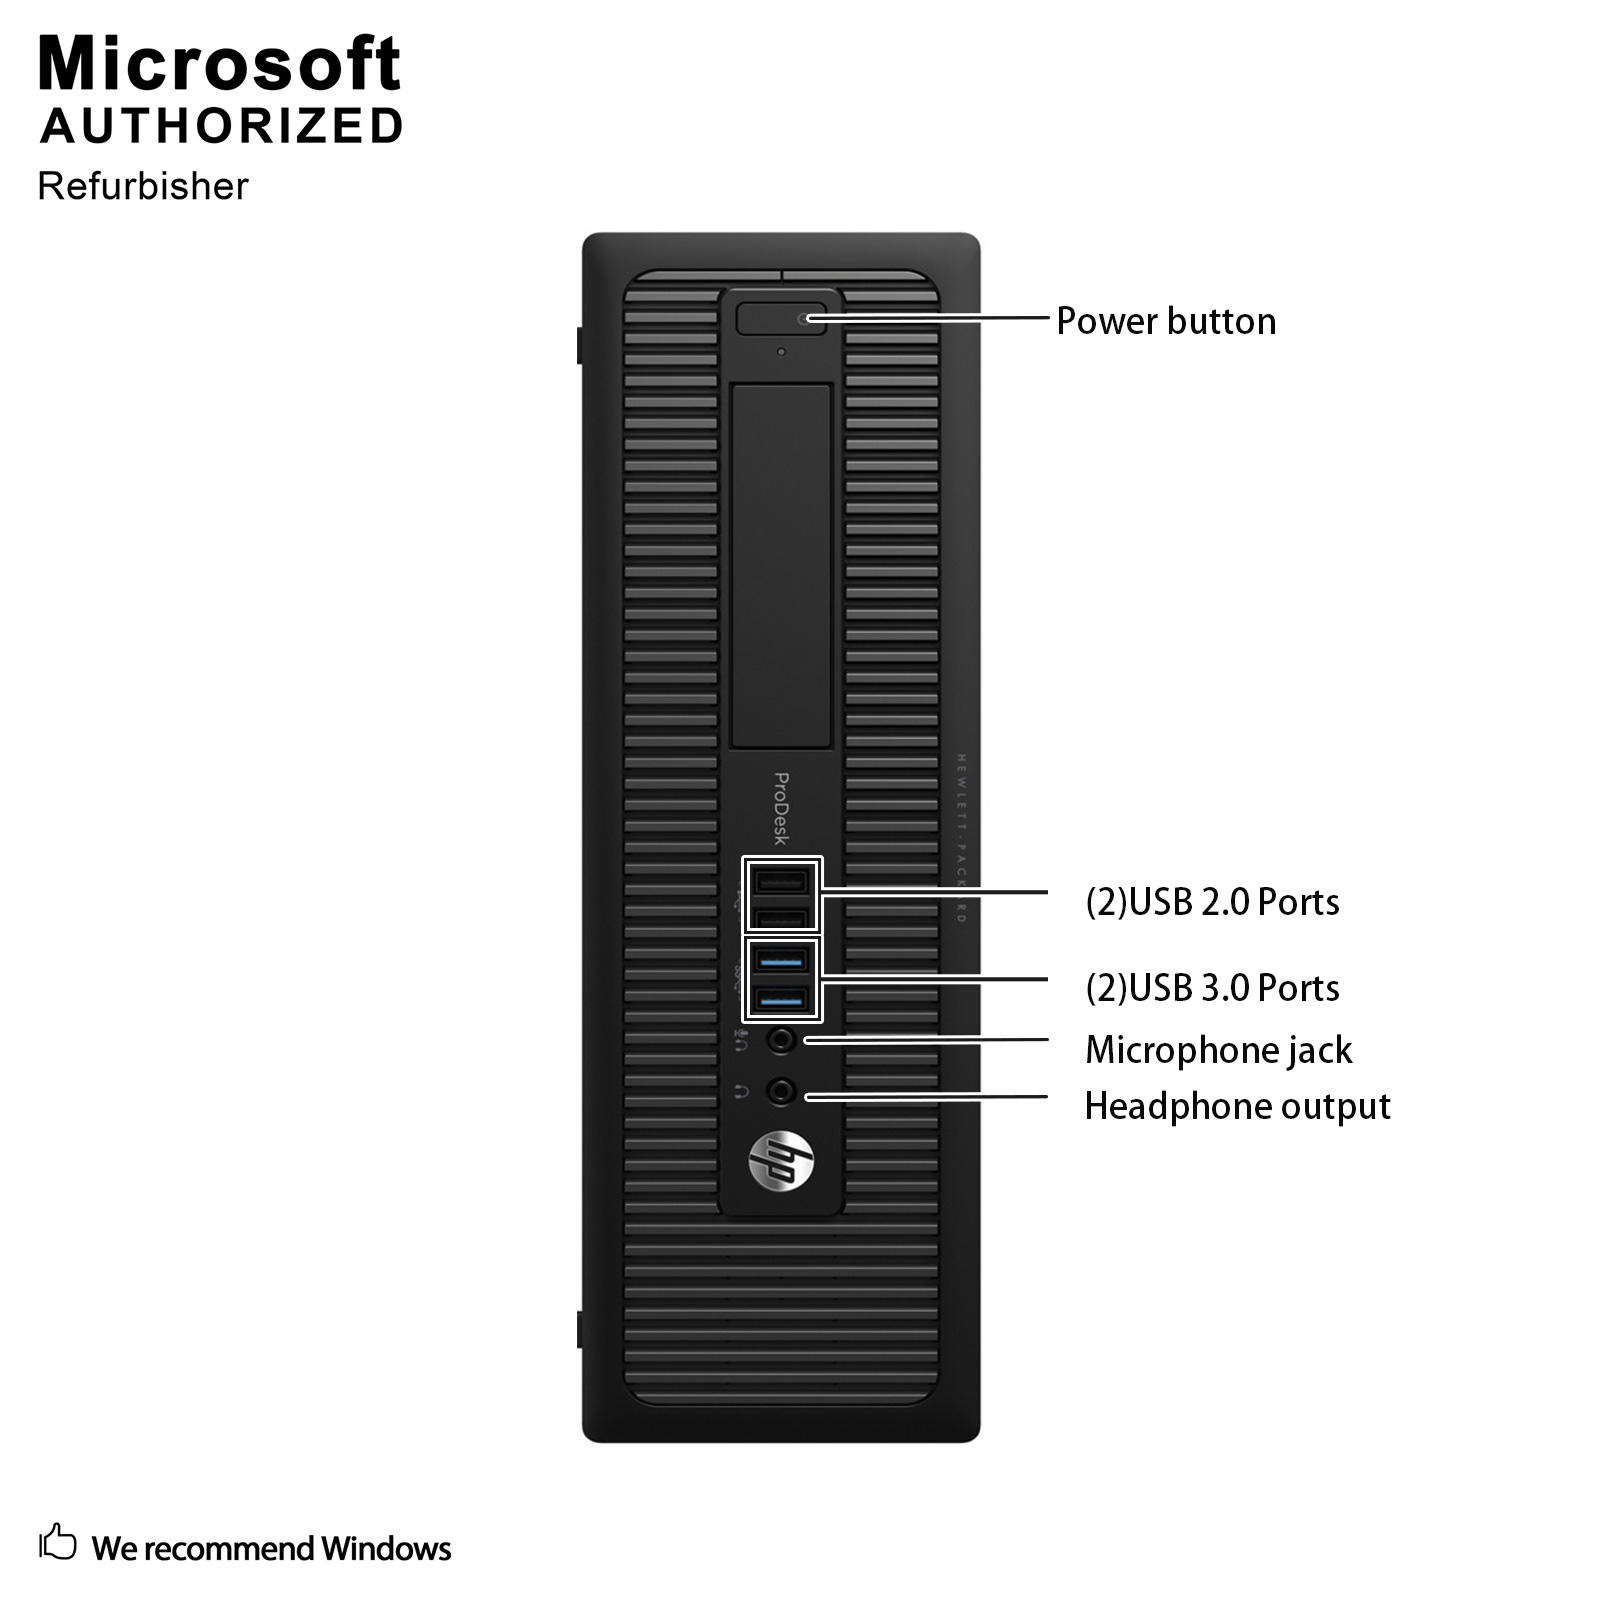 HP ProDesk 600 G1 SFF Desktop PC Intel Quad Core I5-4590 3.3Ghz, 16G DDR3, 1T SSD, VGA, DP, WiFi, Bluetooth, DVDRW, Mouse and Keyboard, Windows 10 Pro 64 Bit Used Grade A - image 5 of 7